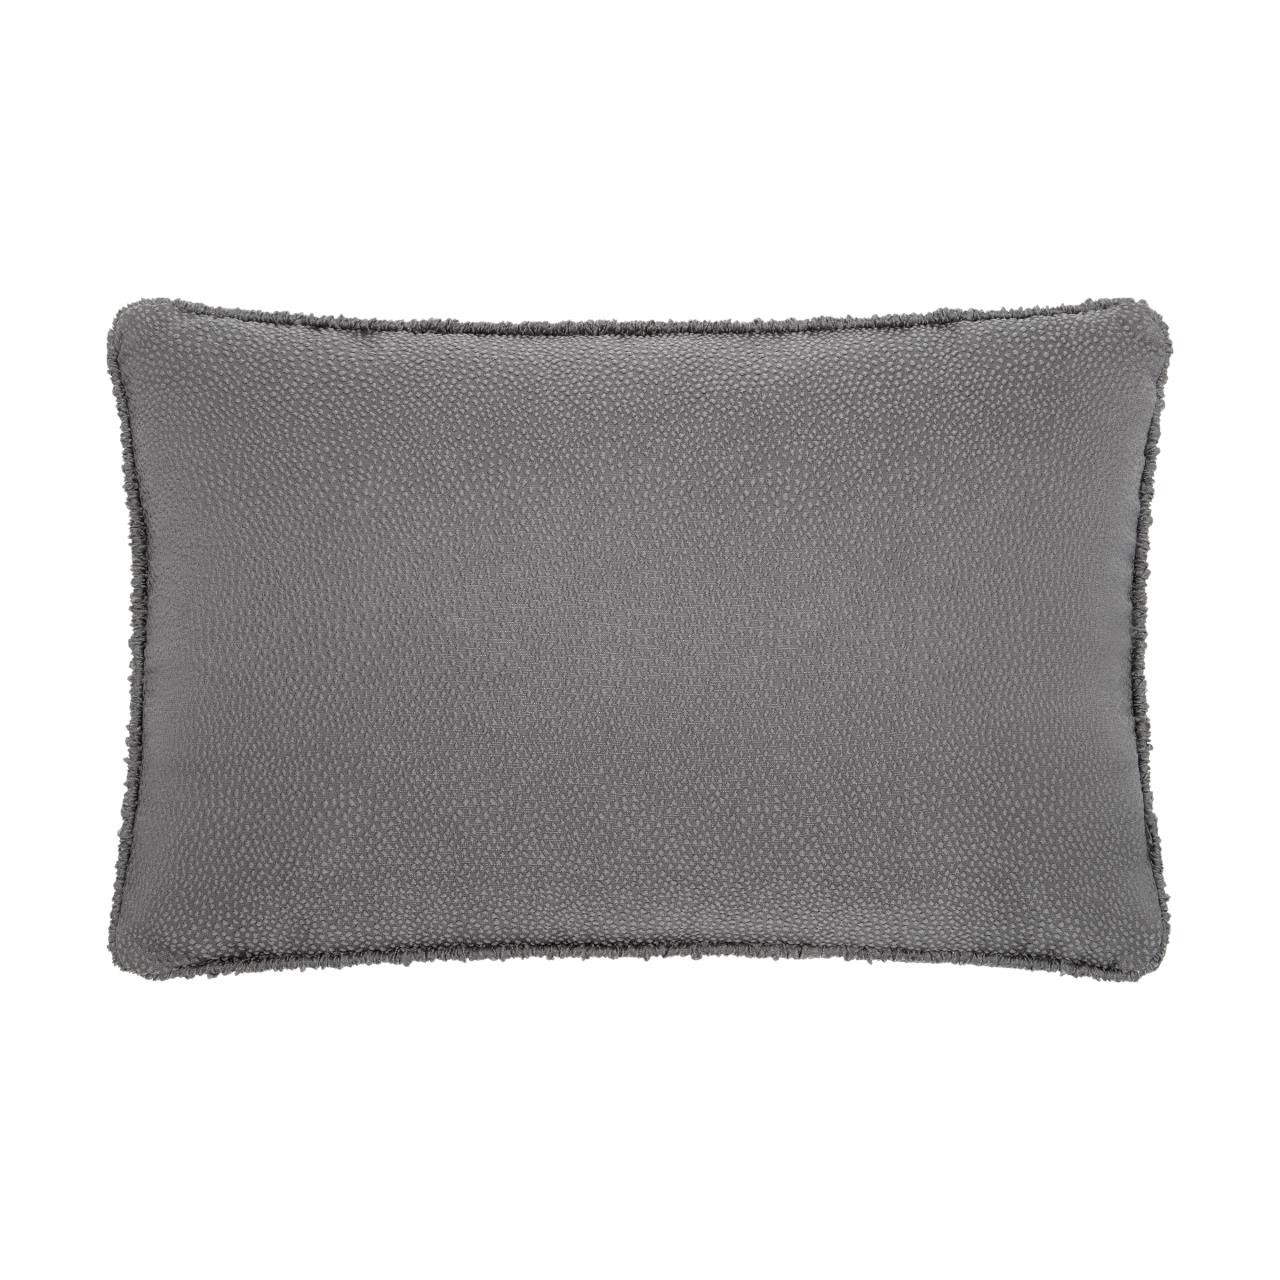 Norwich Pewter Boudoir Pillow by Rose Tree | Paul's Home Fashions